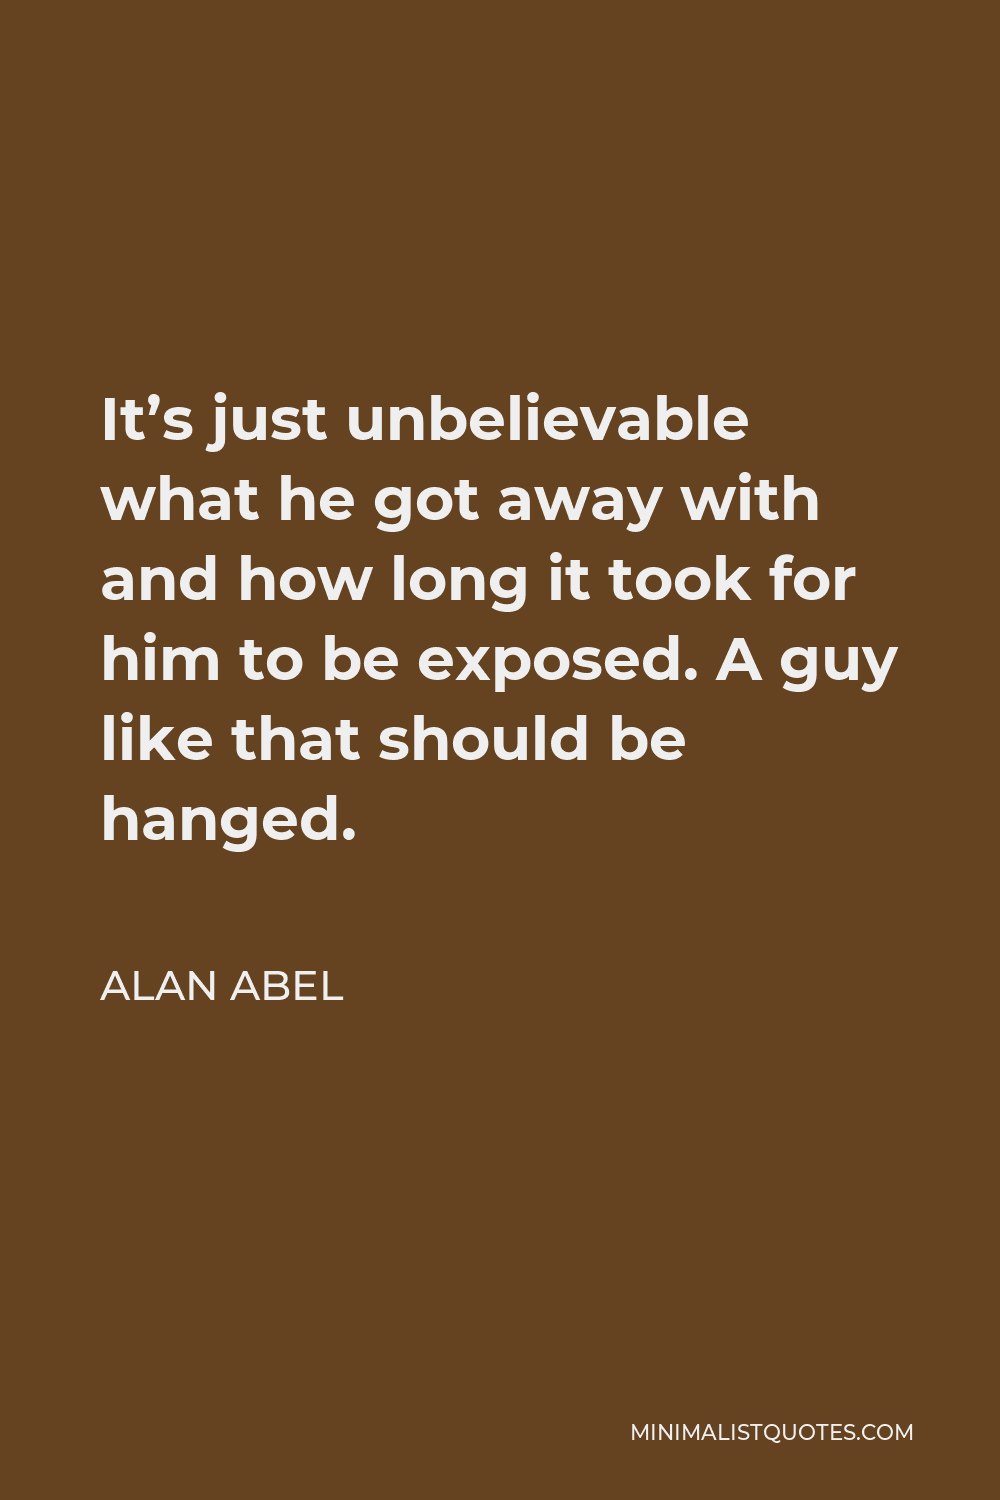 Alan Abel Quote - It’s just unbelievable what he got away with and how long it took for him to be exposed. A guy like that should be hanged.